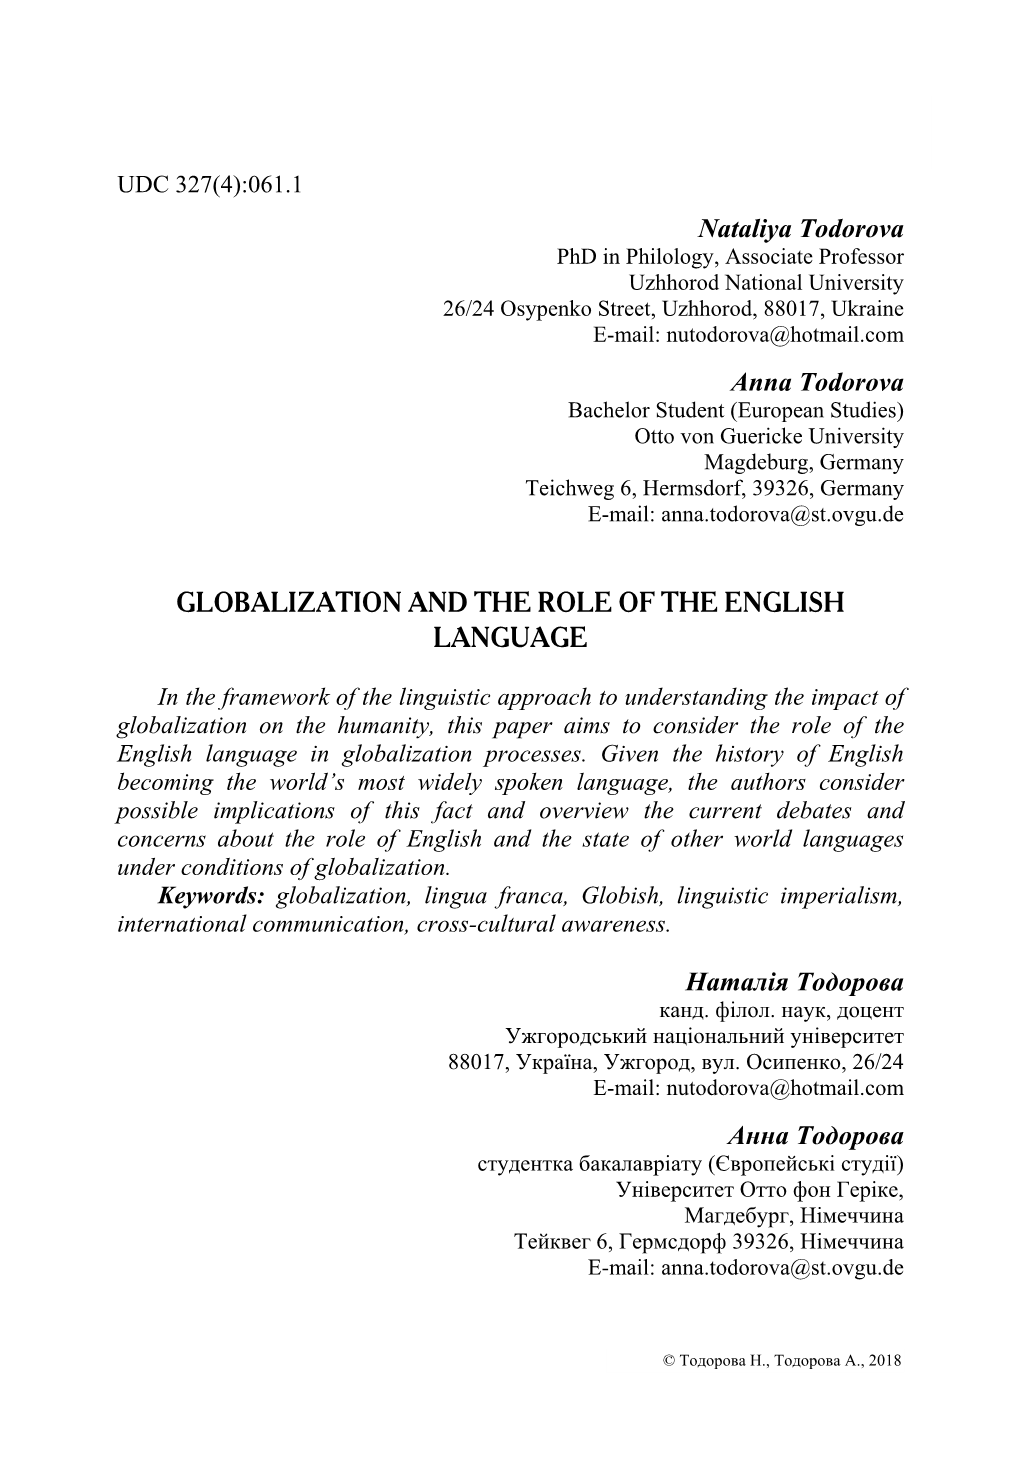 Globalization and the Role of the English Language